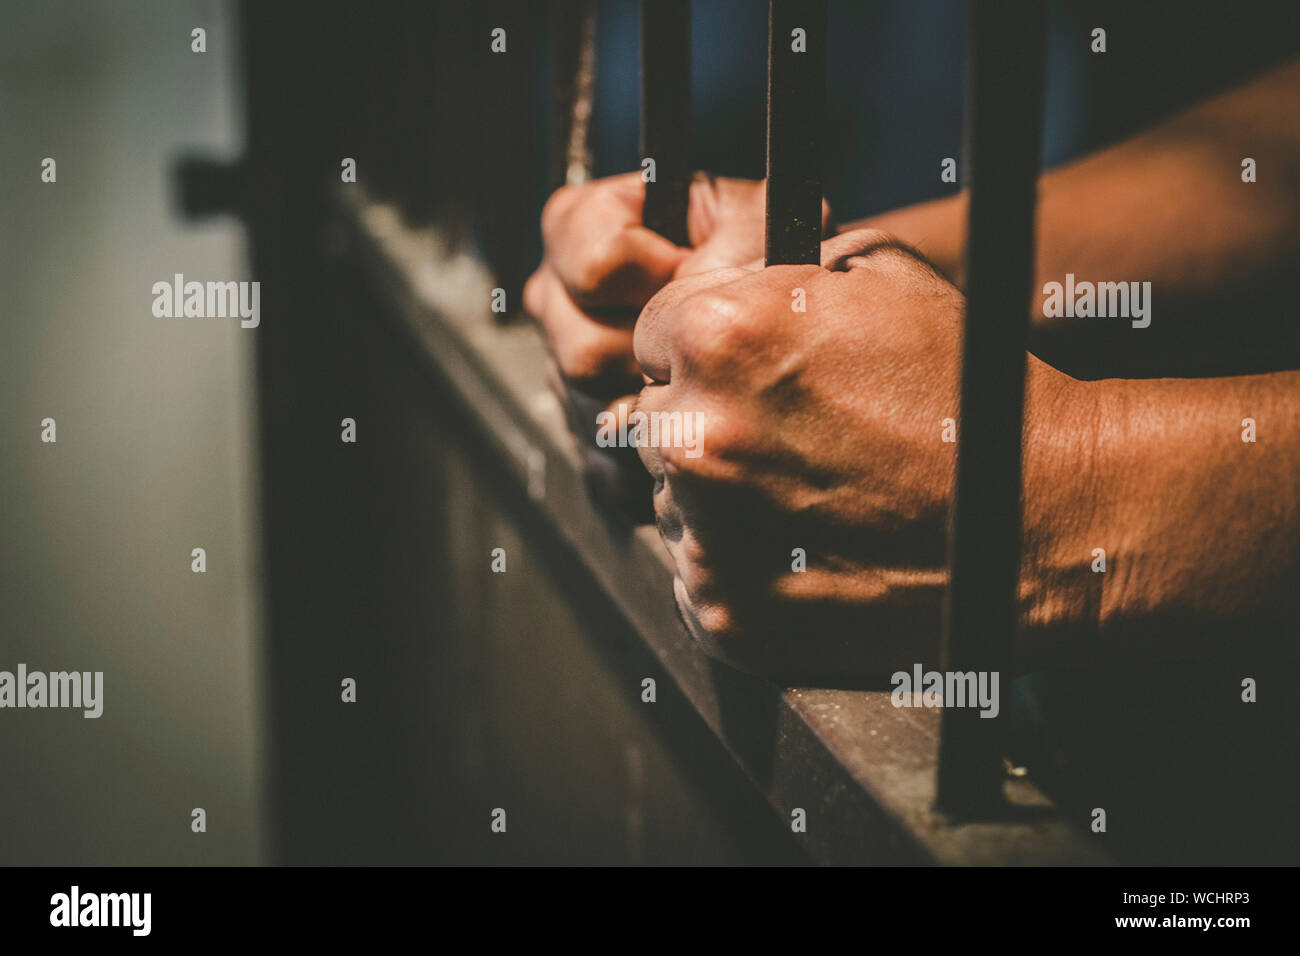 Cropped Hands Of Male Prisoner Holding Prison Bars Stock Photo Alamy